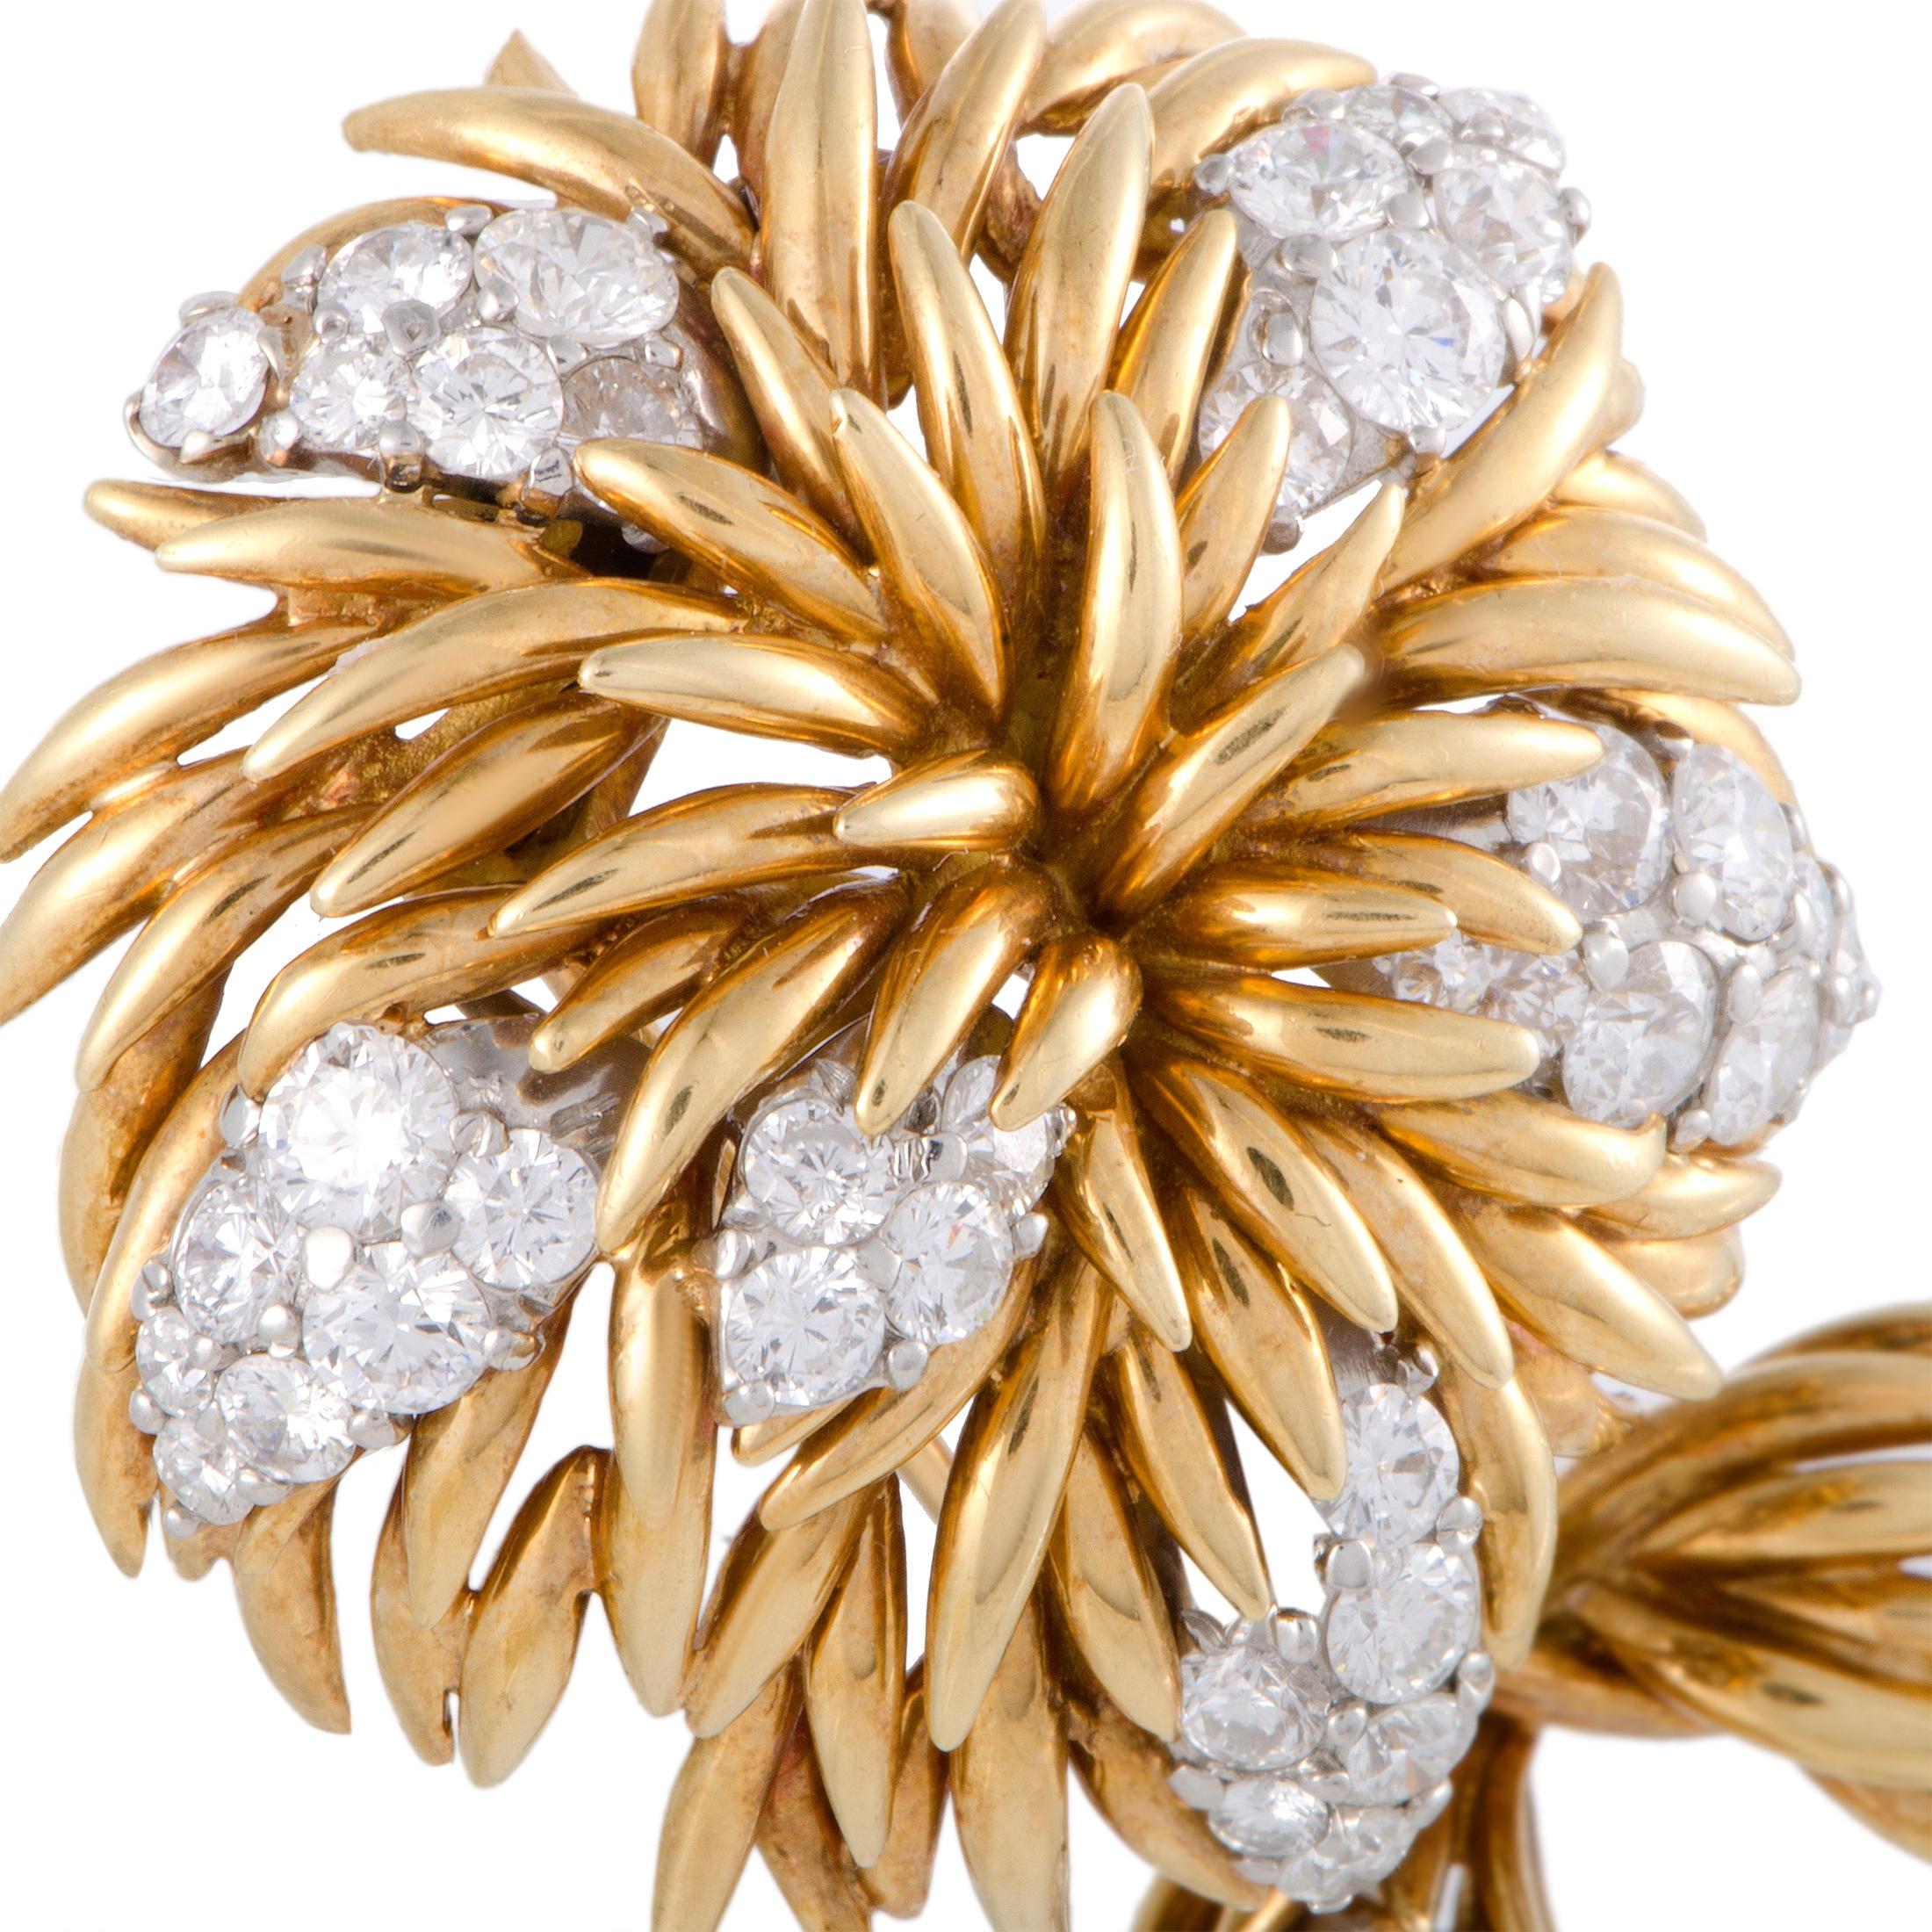 A stunningly intriguing design is beautifully presented in 18K yellow and 18K white gold in this superb brooch that is created by Van Cleef & Arpels. The brooch is luxuriously decorated with colorless (grade E) diamonds of VVS clarity that amount to